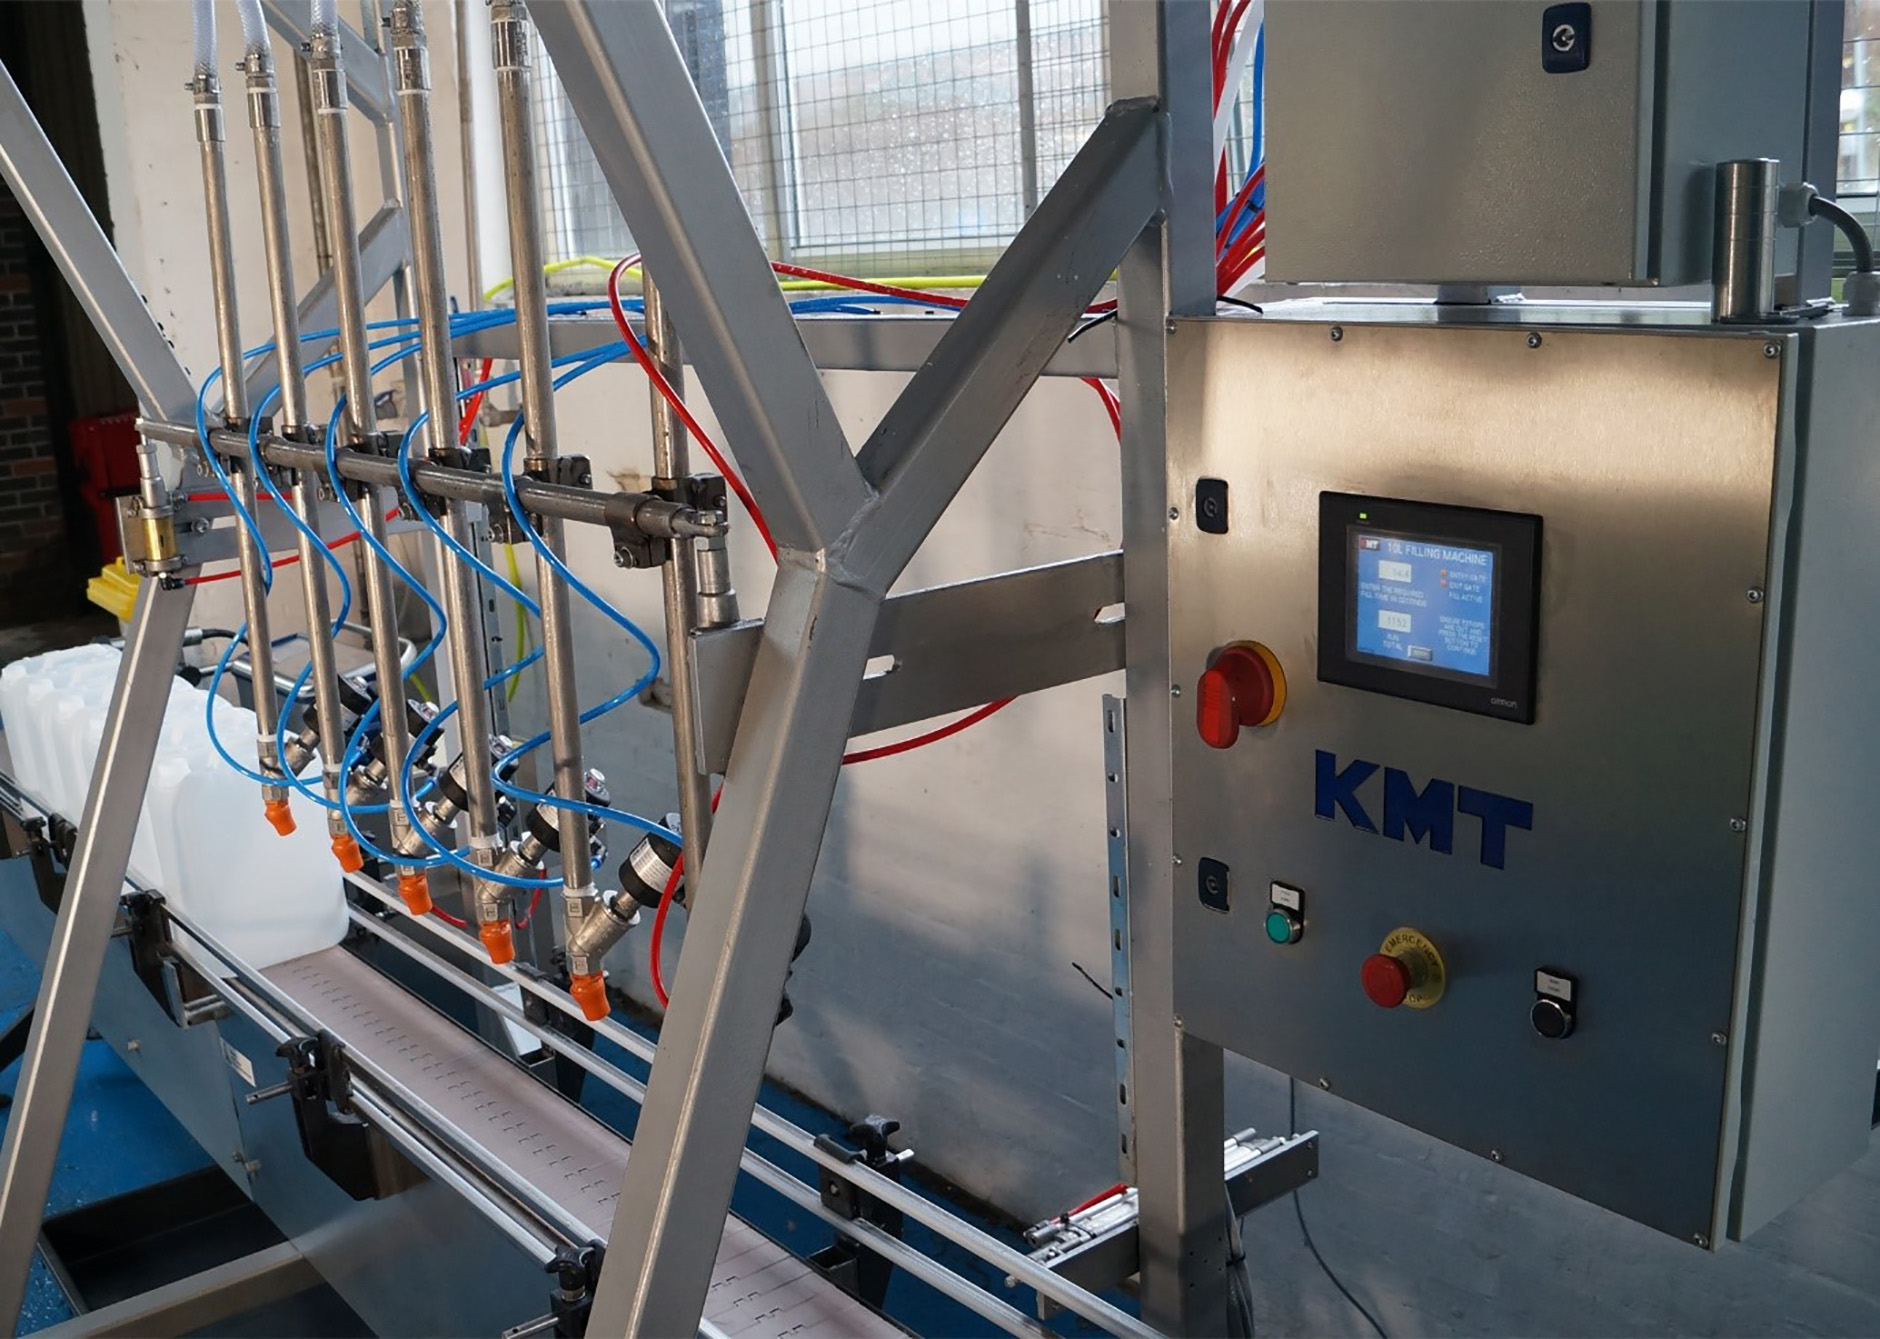 Filling operations are carried out at a dedicated bottling plant, utilising a bespoke filling machine to bottle AdBlue into 10 litre containers